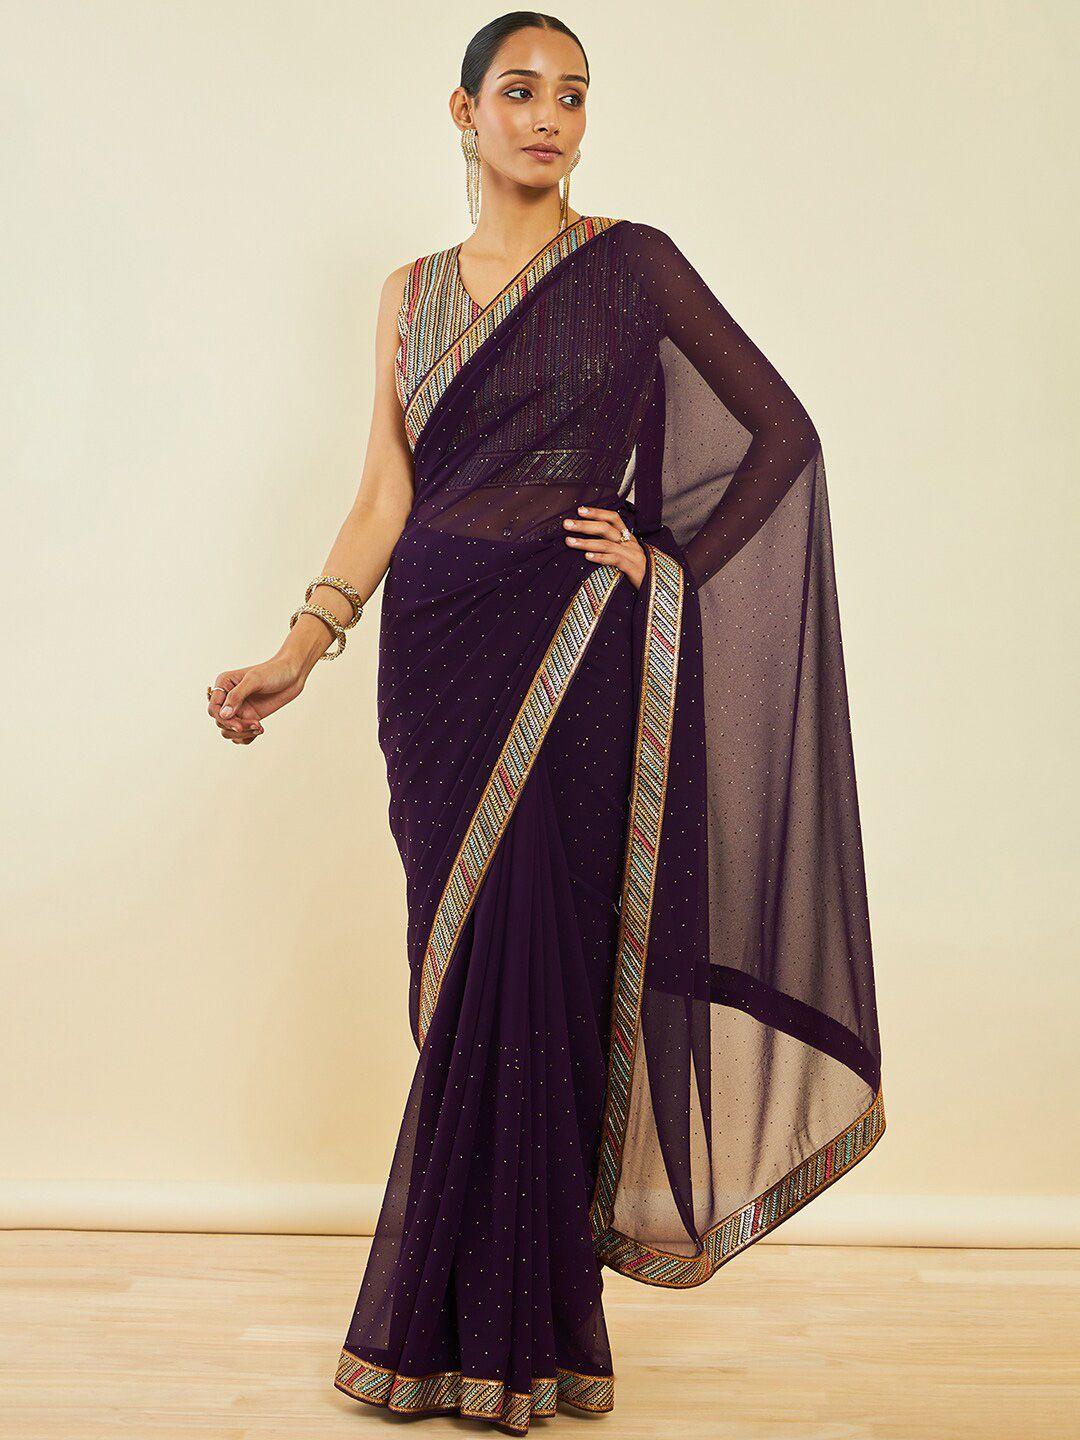 Soch Embellished Beads and Stones Saree